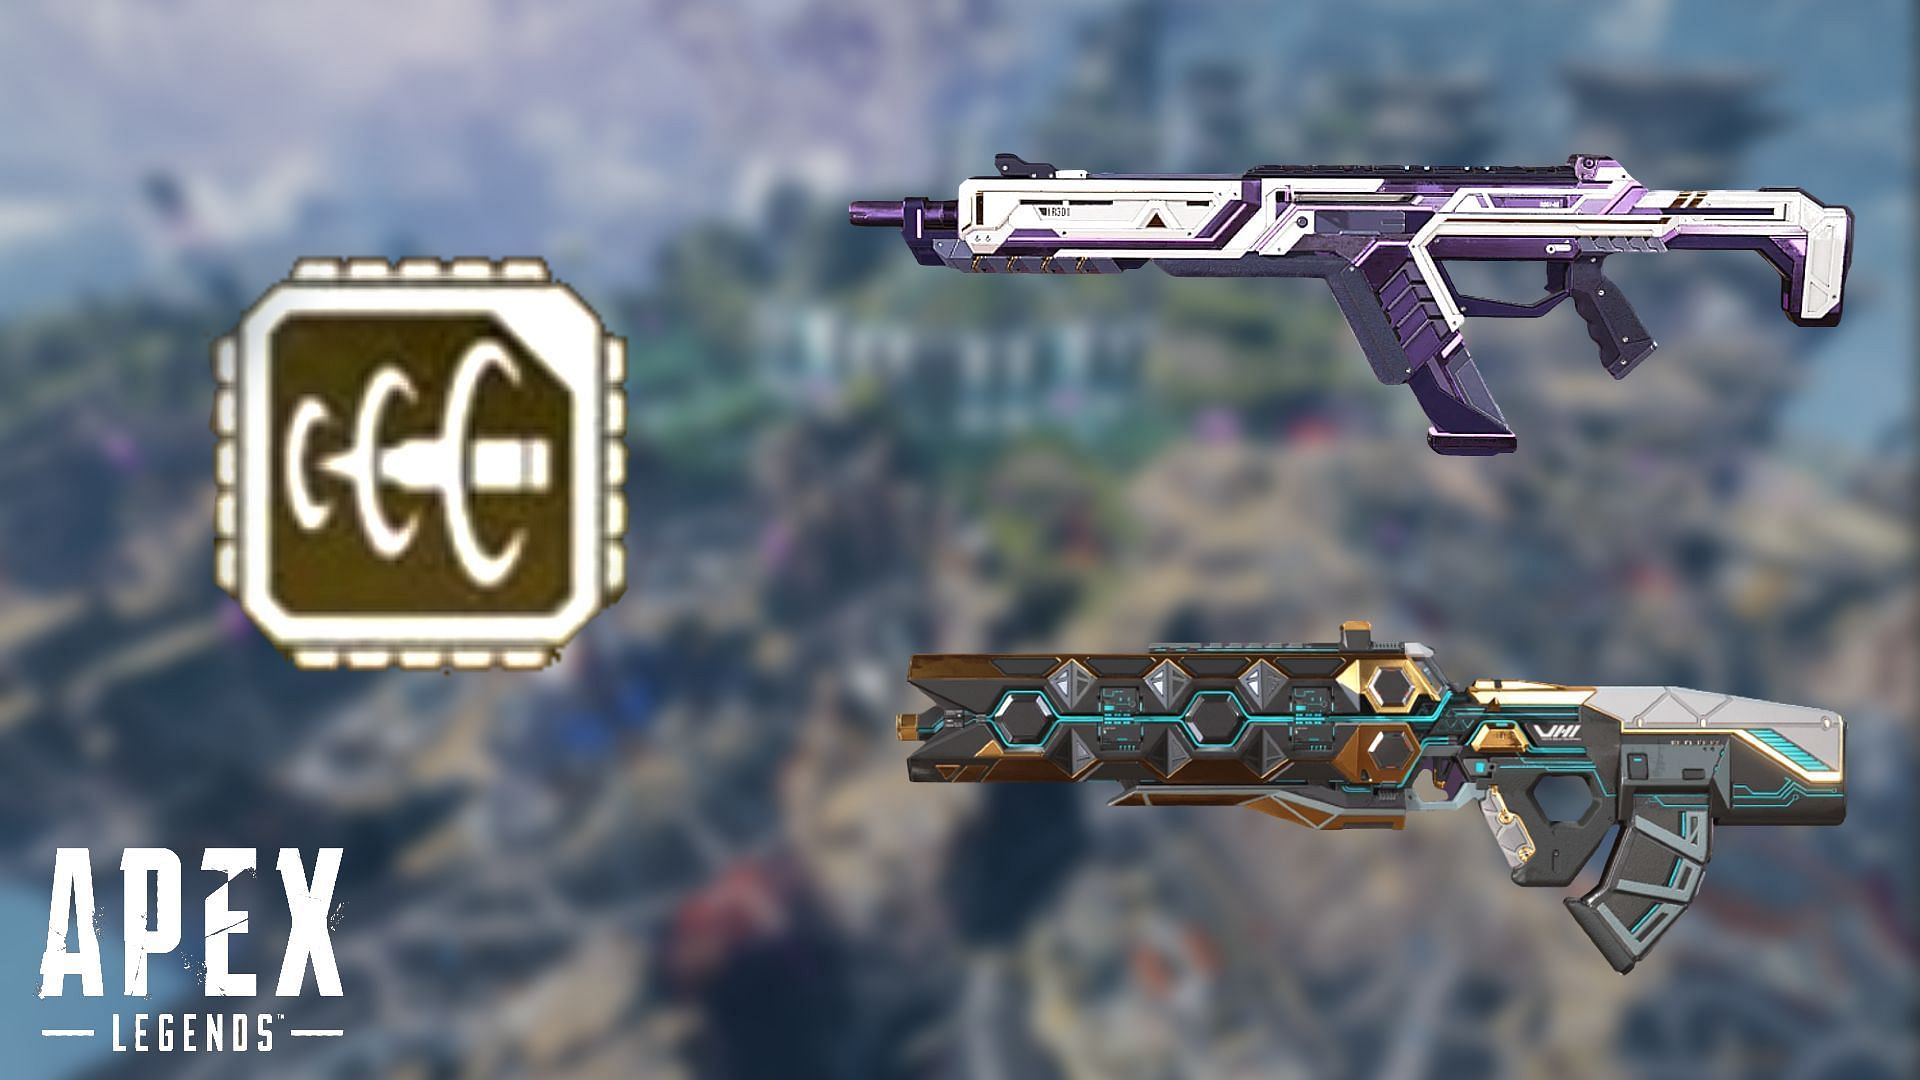 The latest update will nerf the Anvil Receiver Hop-Up in Apex Legends (Image via EA)